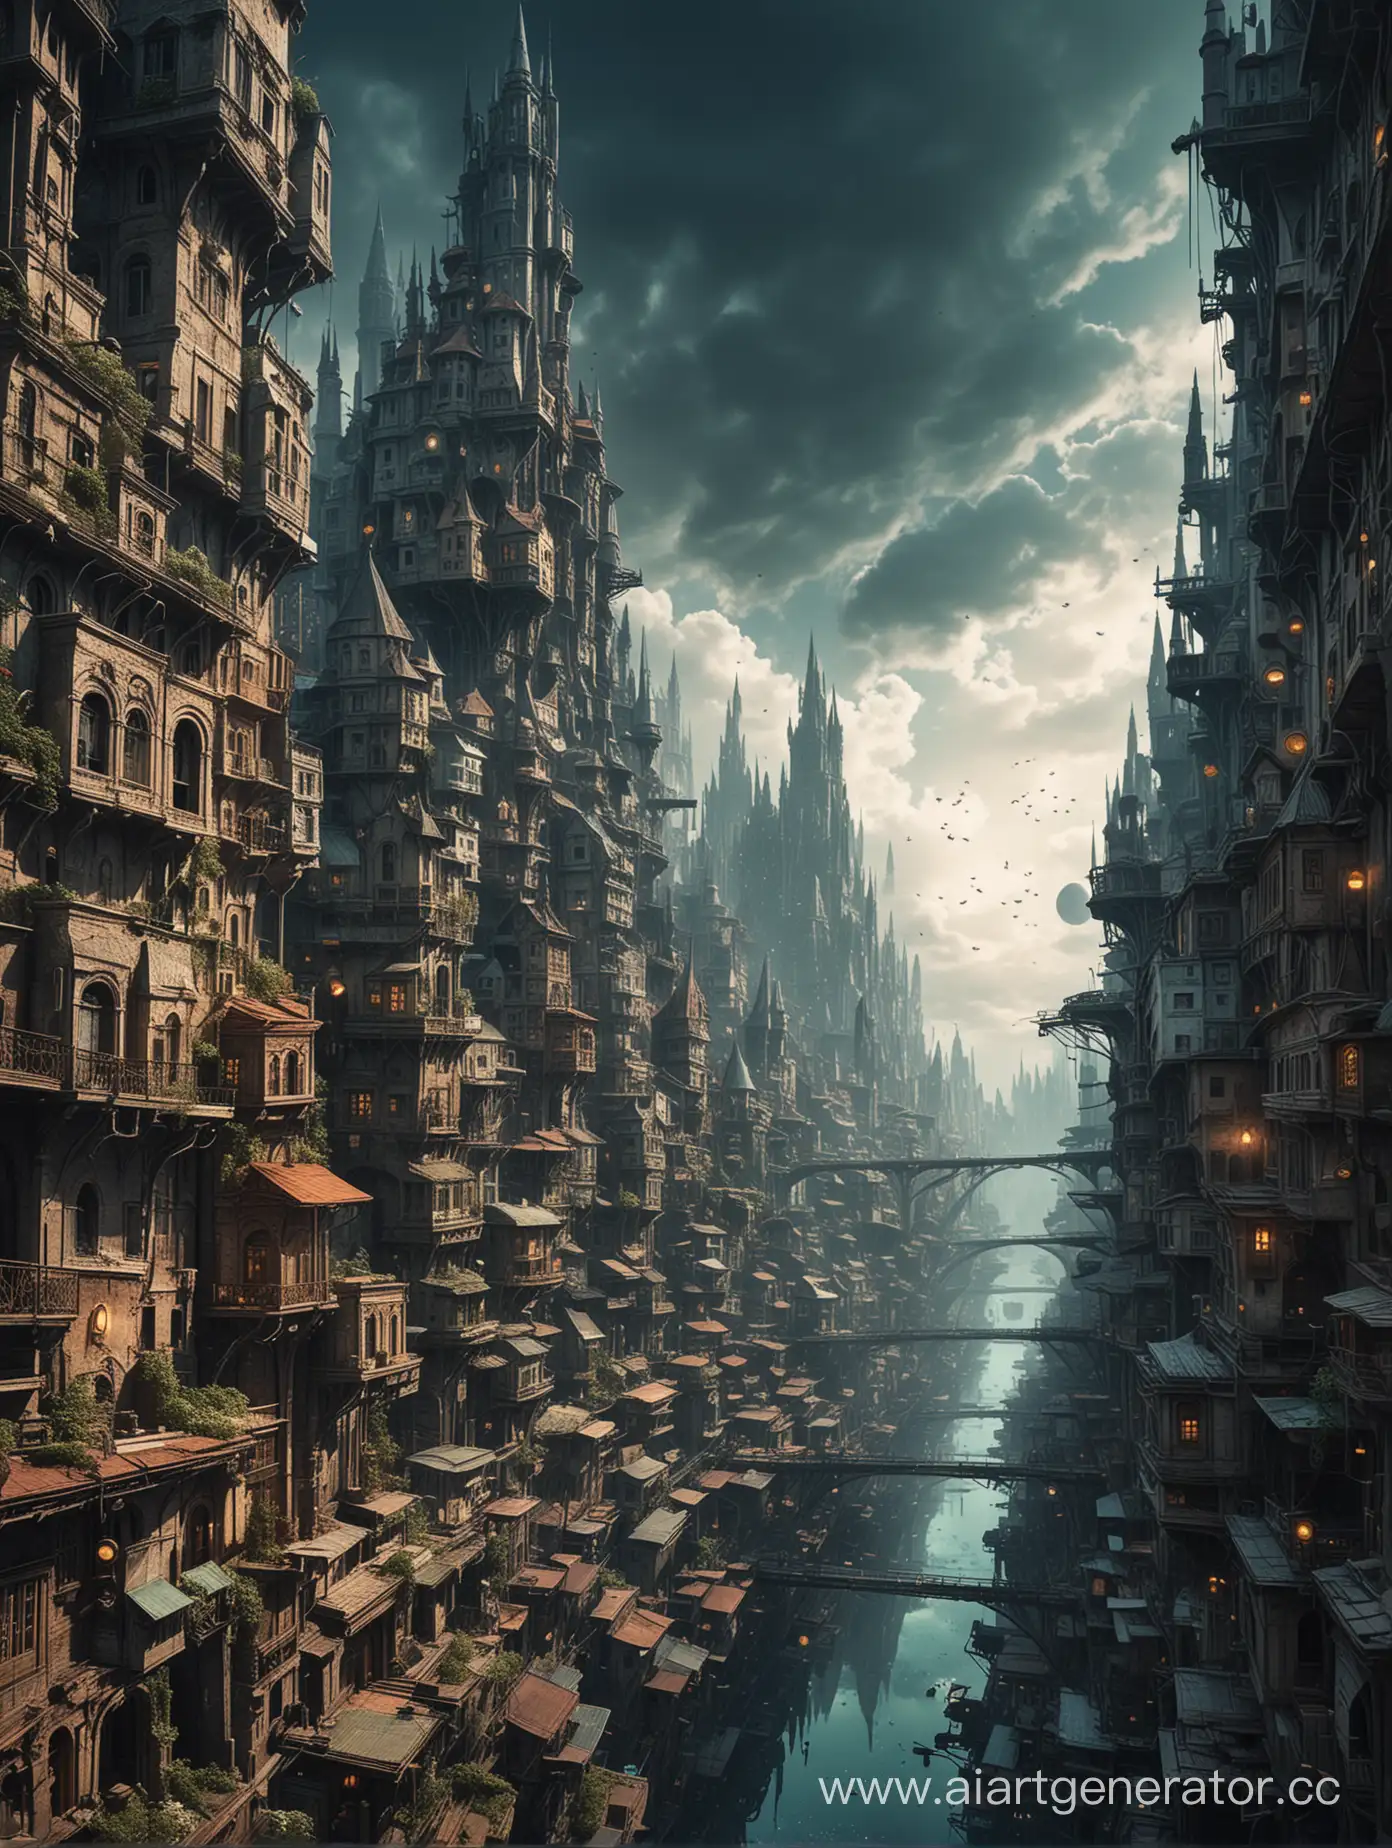 Parallel-Universe-City-Inhabited-by-Impure-Beings-Fantasy-Art